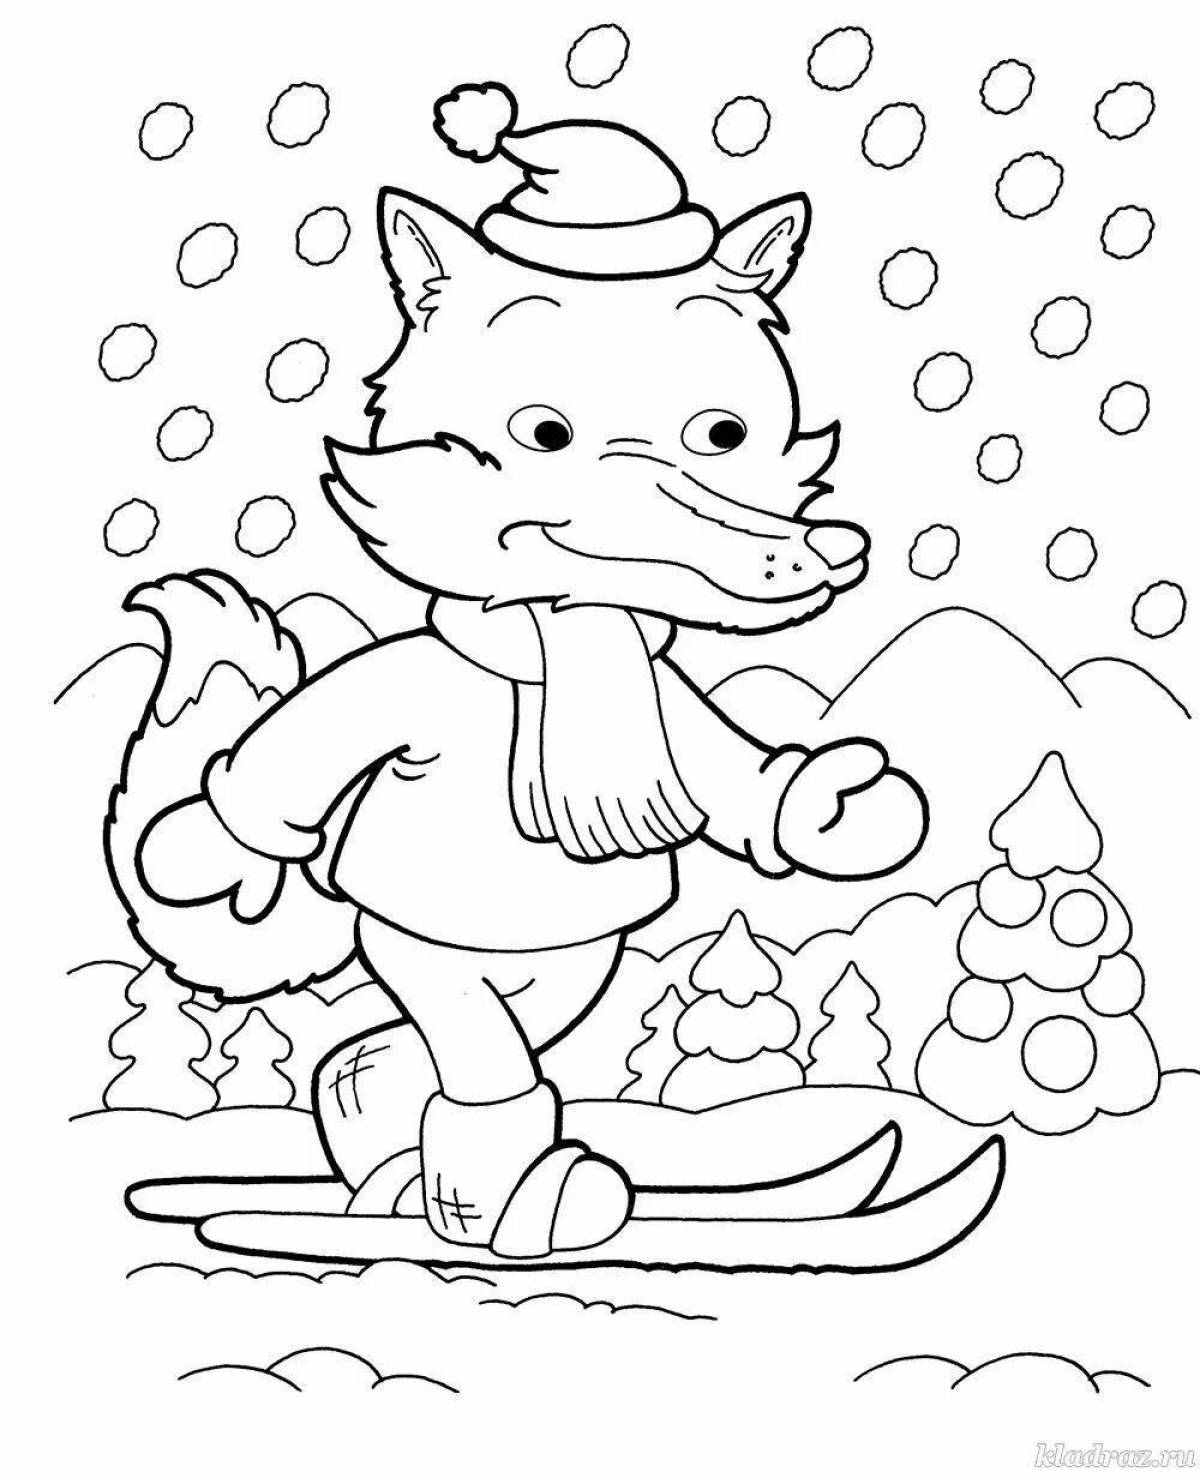 Coloring page fluffy fox in winter